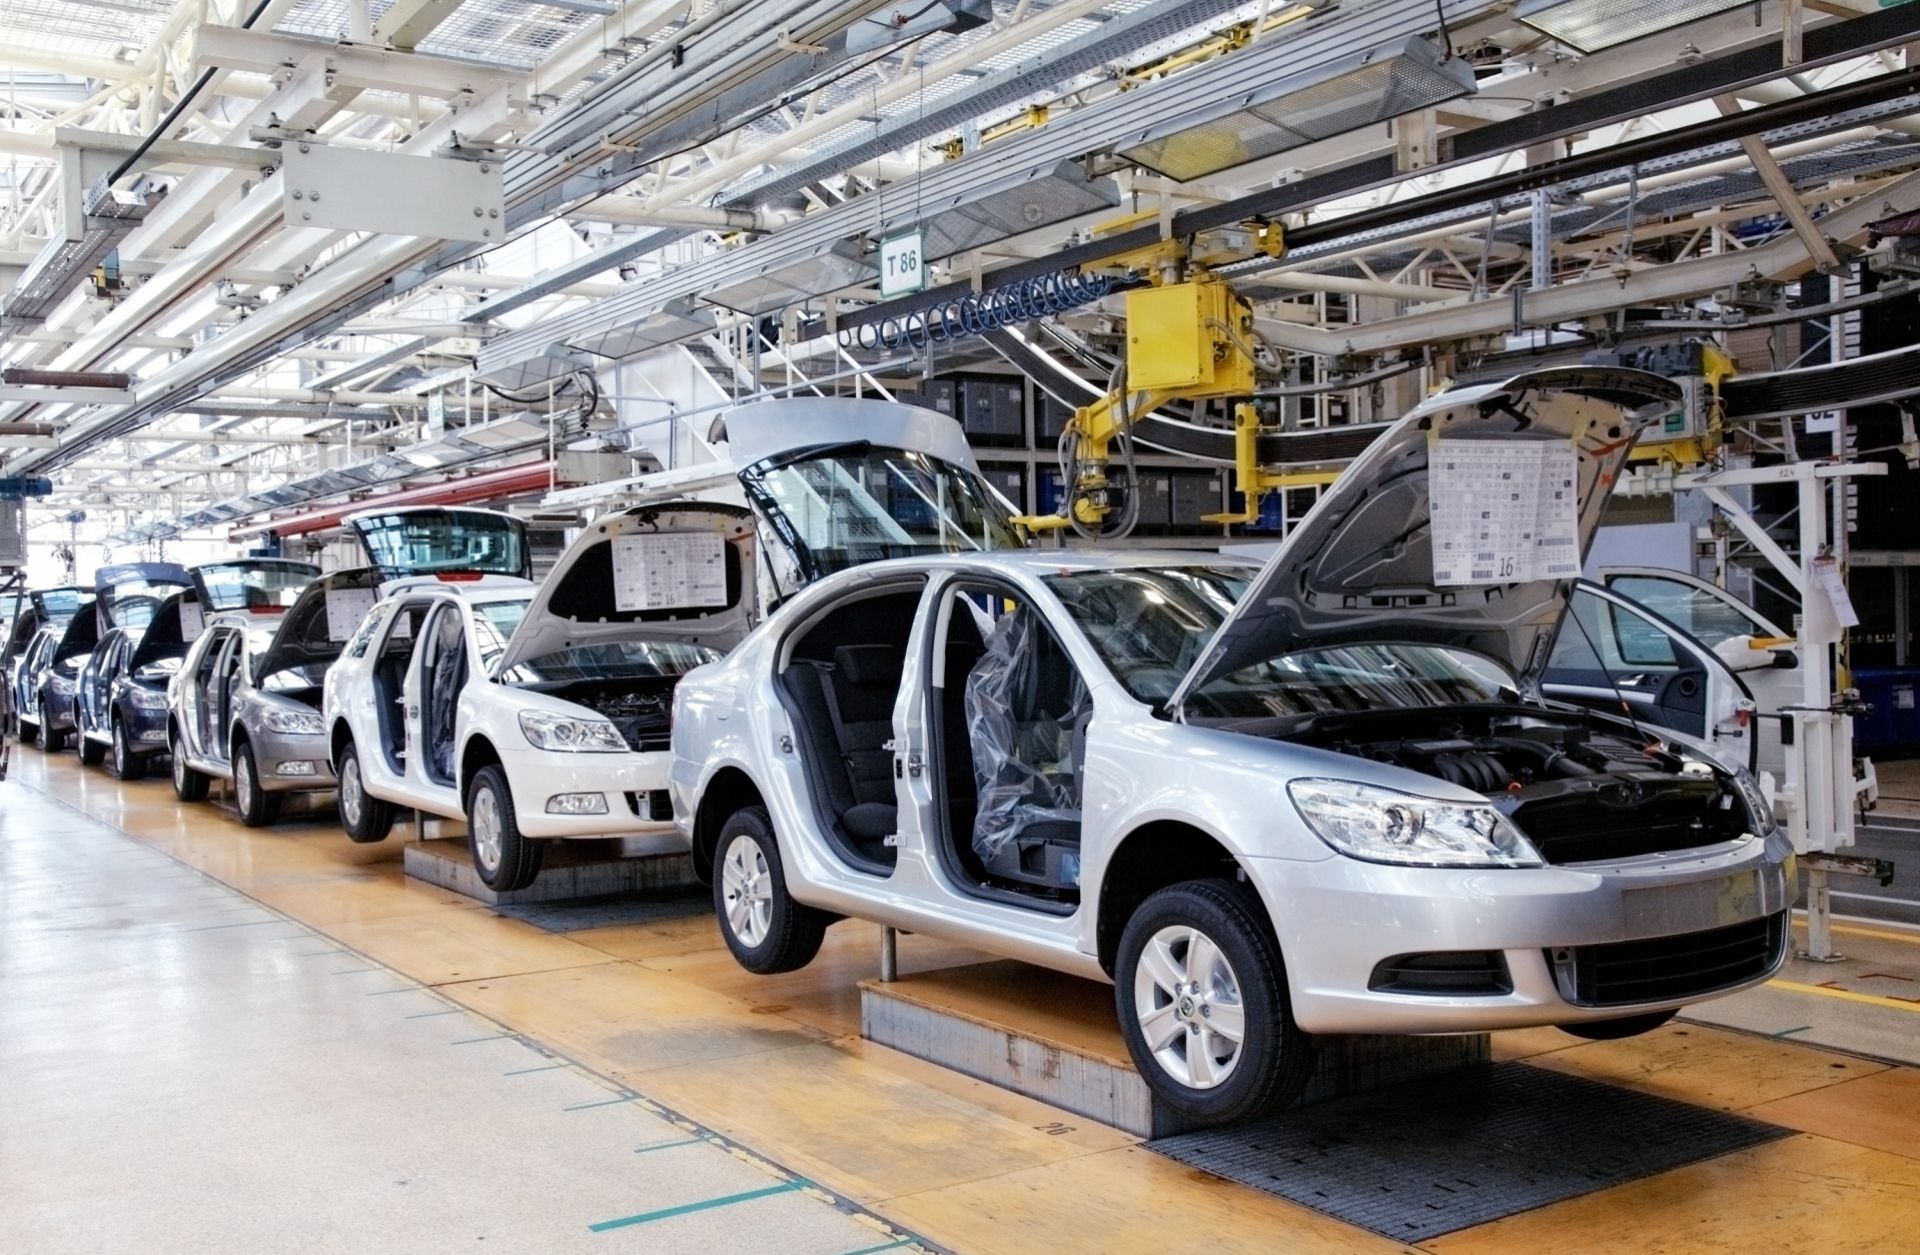 Cars sit on an assembly line.